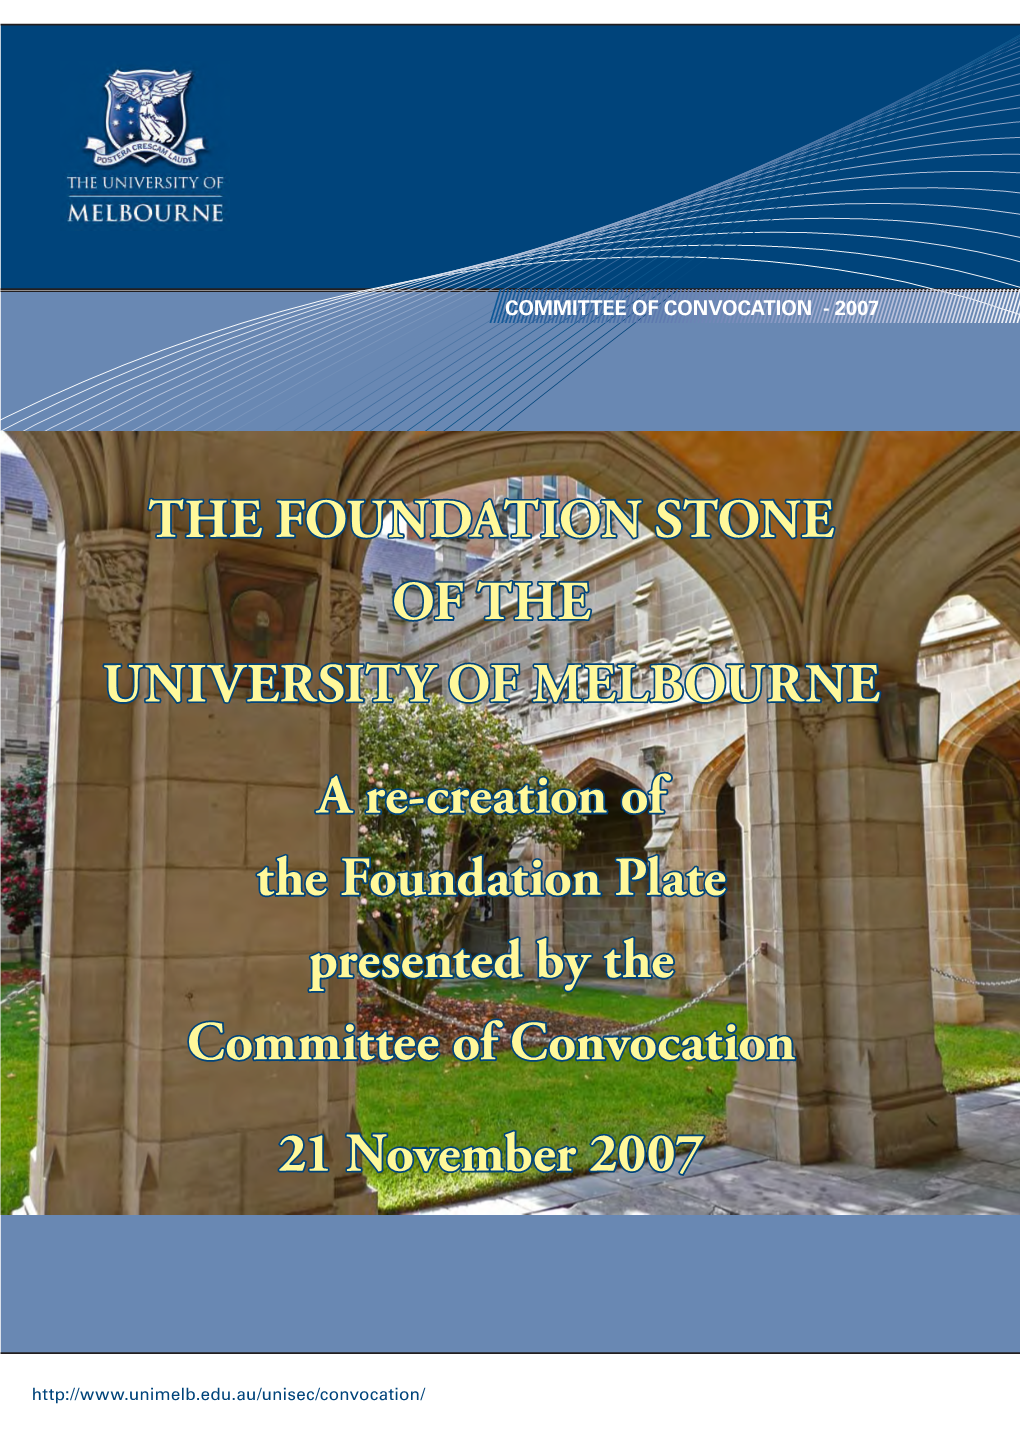 THE FOUNDATION STONE of the UNIVERSITY of MELBOURNE a Re-Creation of the Foundation Plate Presented by the Committee of Convocat